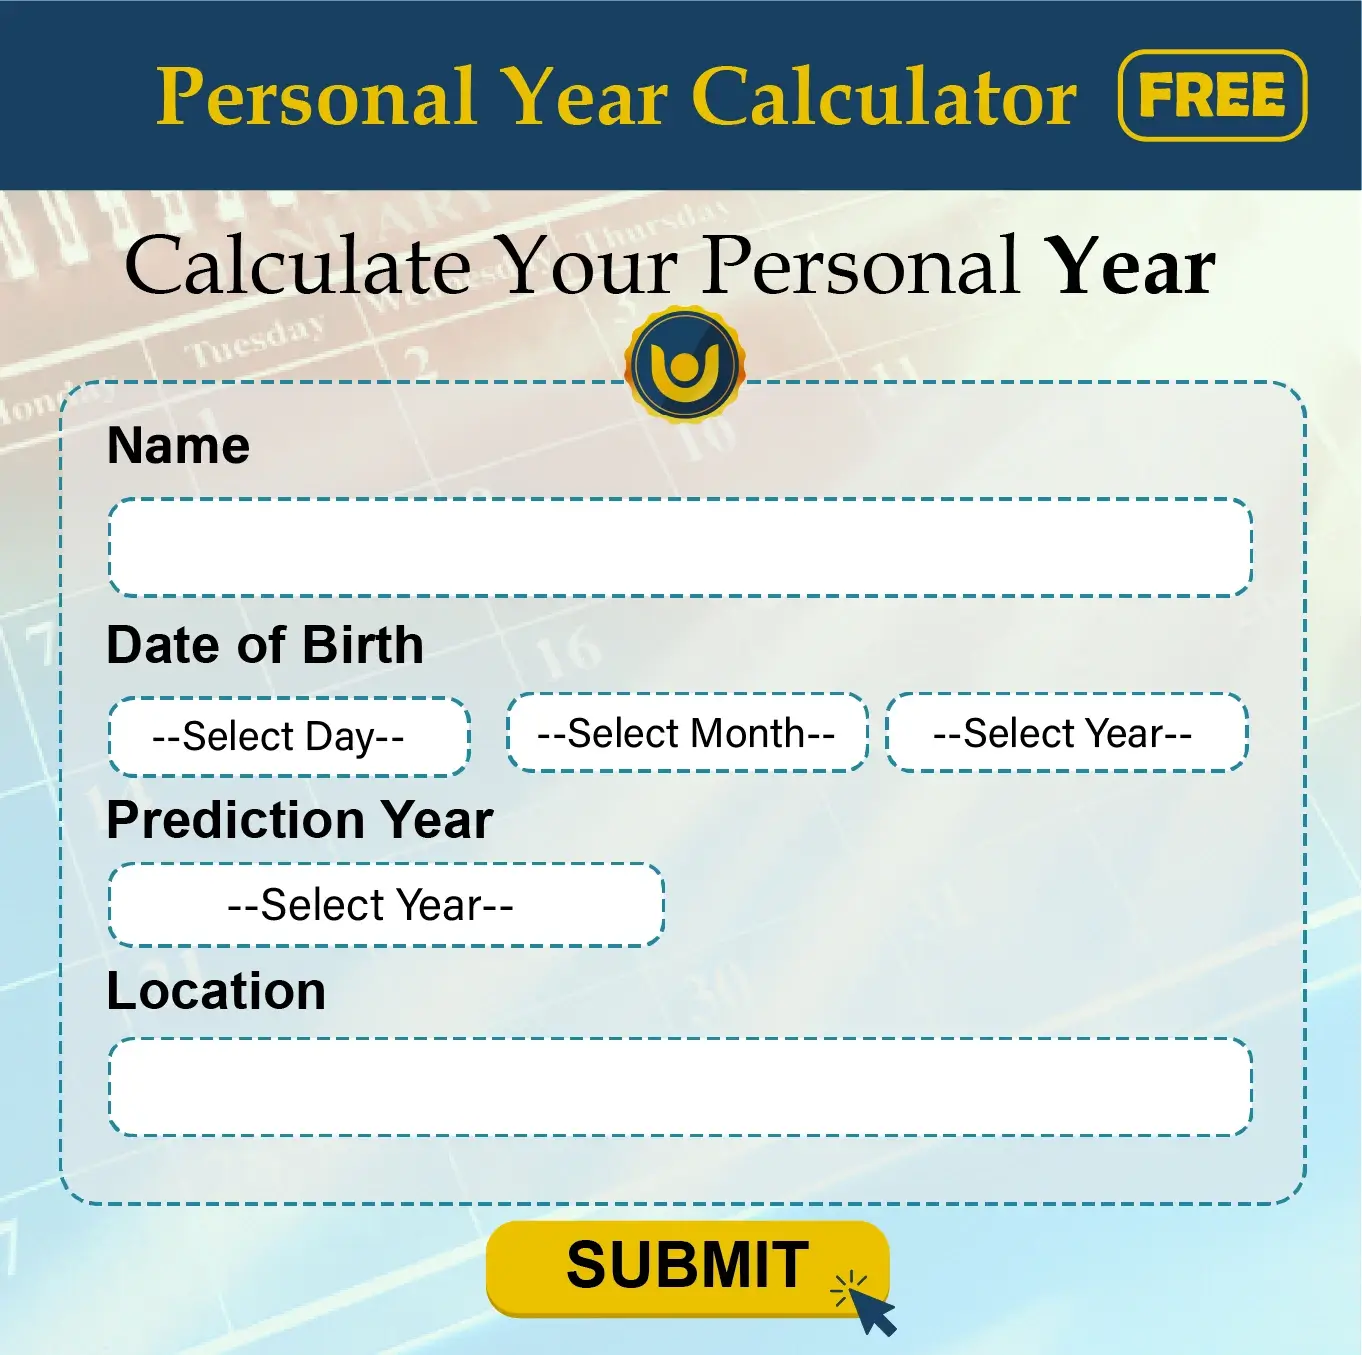 Numerology Personal Year Calculator